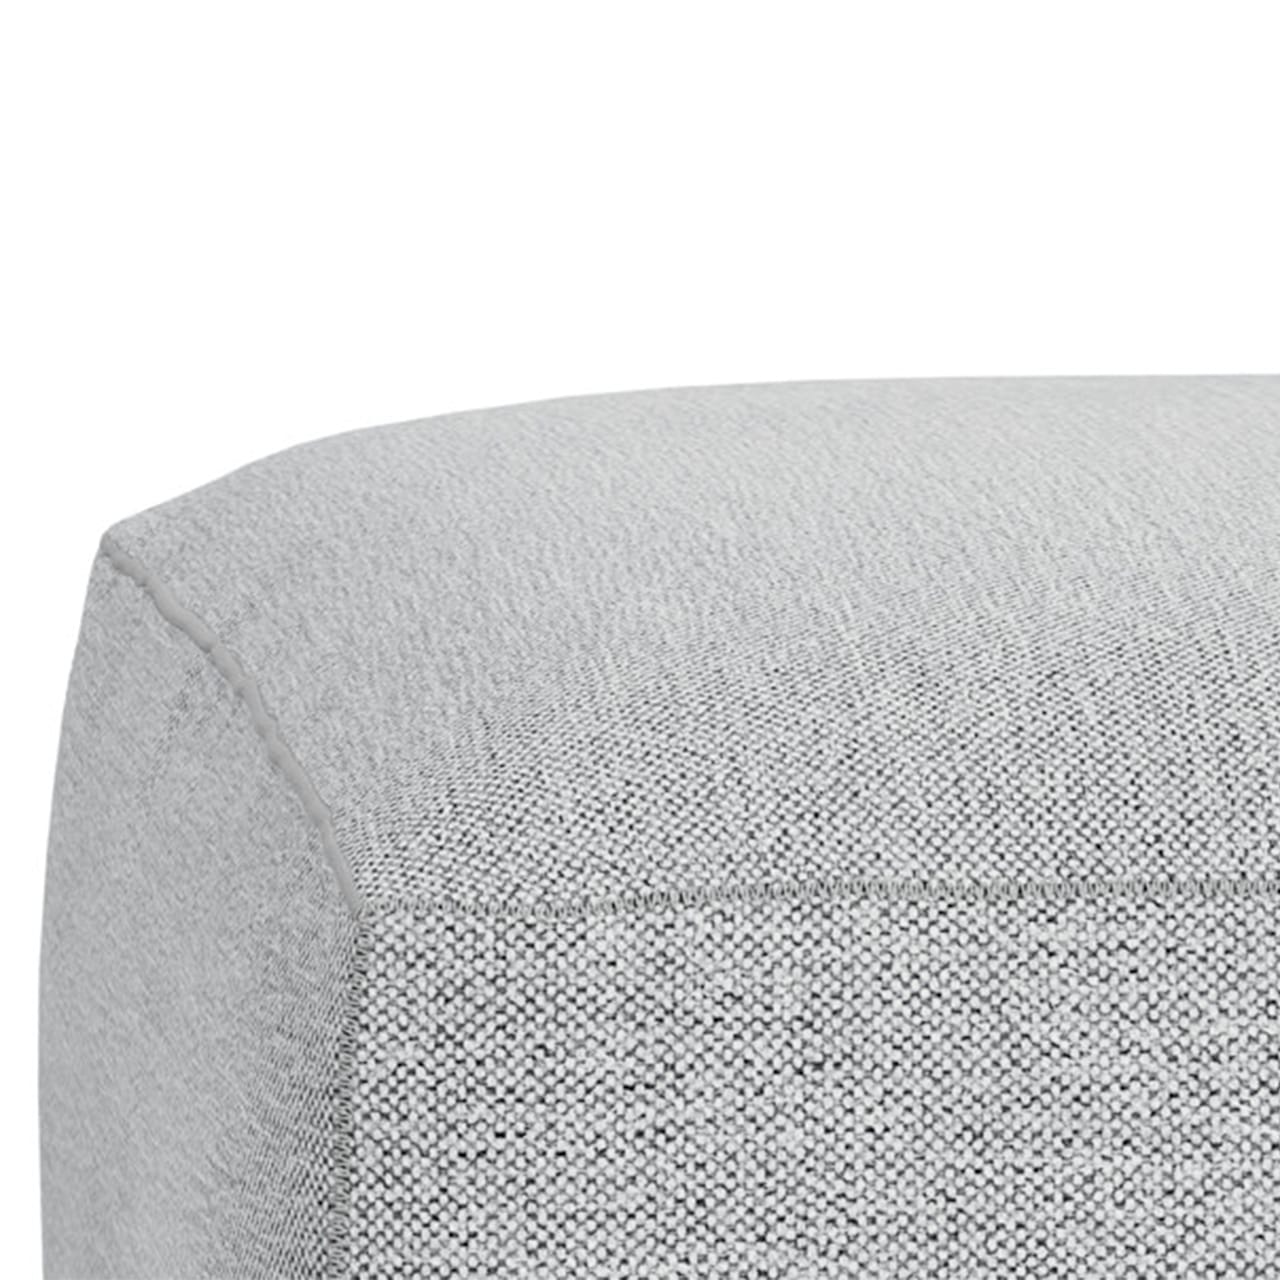 Mags Soft Ottoman - Extra Small